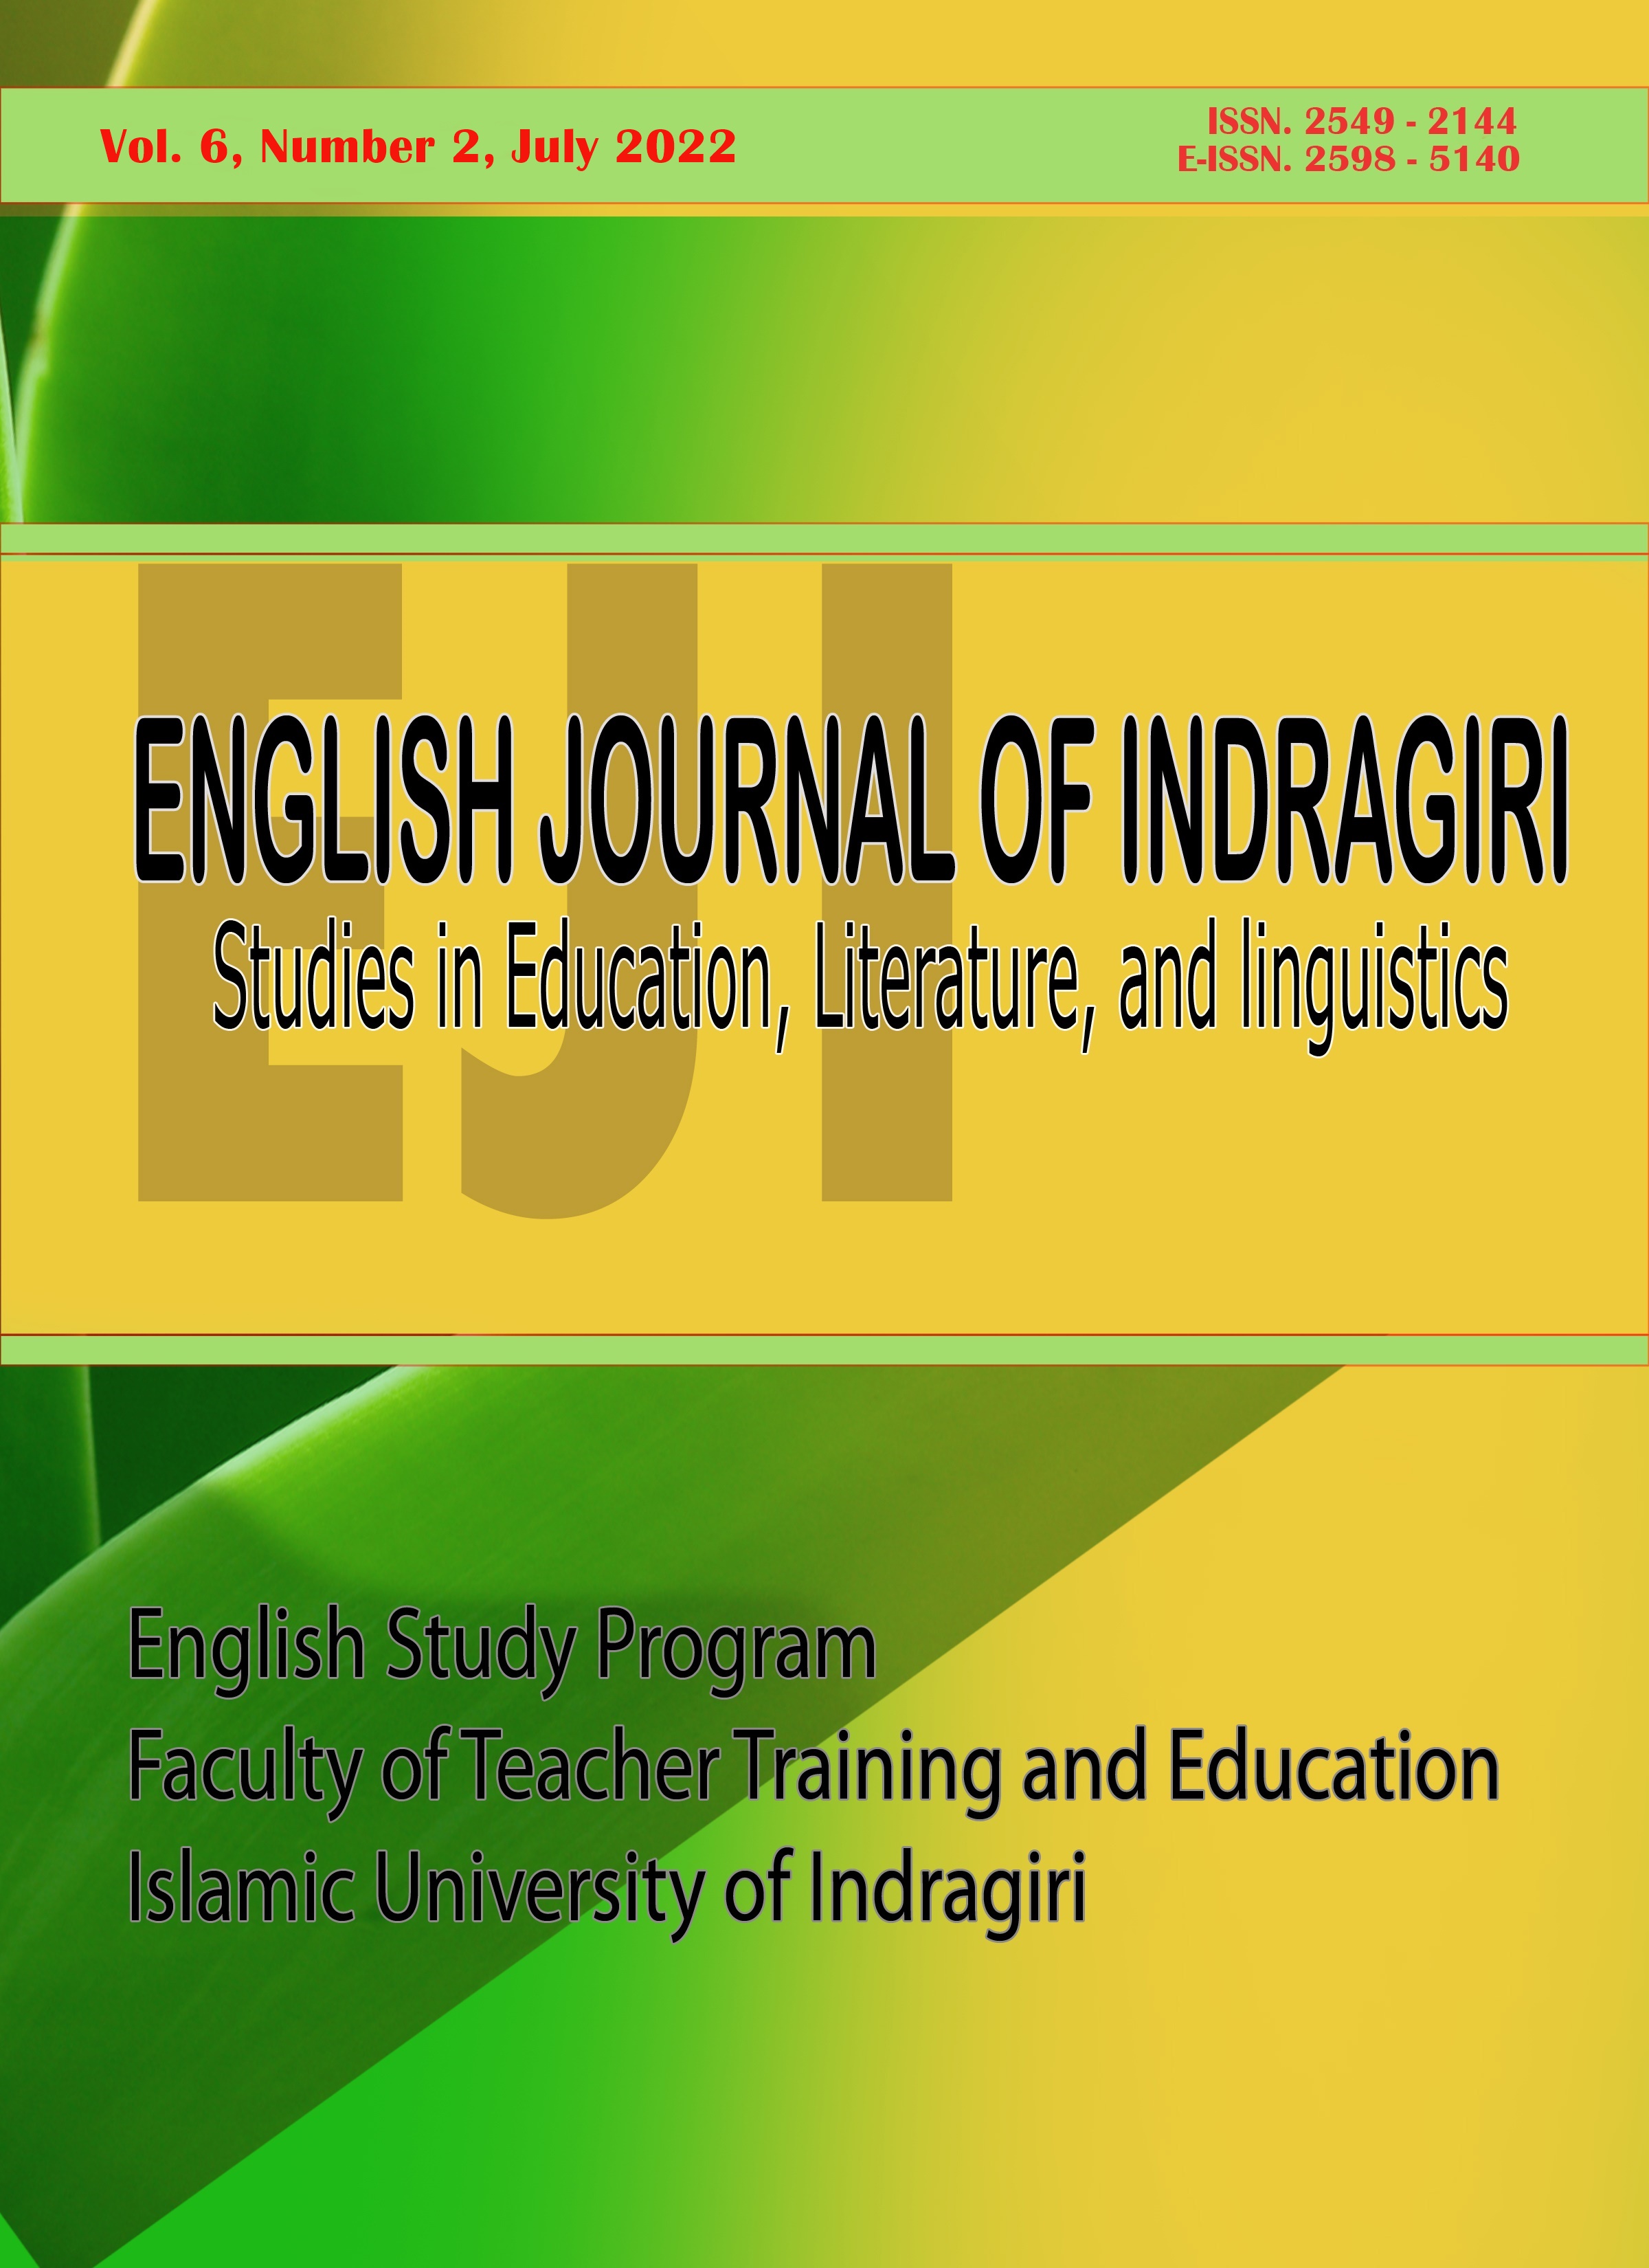 					View Vol. 6 No. 2 (2022): EJI (English Journal of Indragiri): Studies in Education, Literature, and Linguistics
				